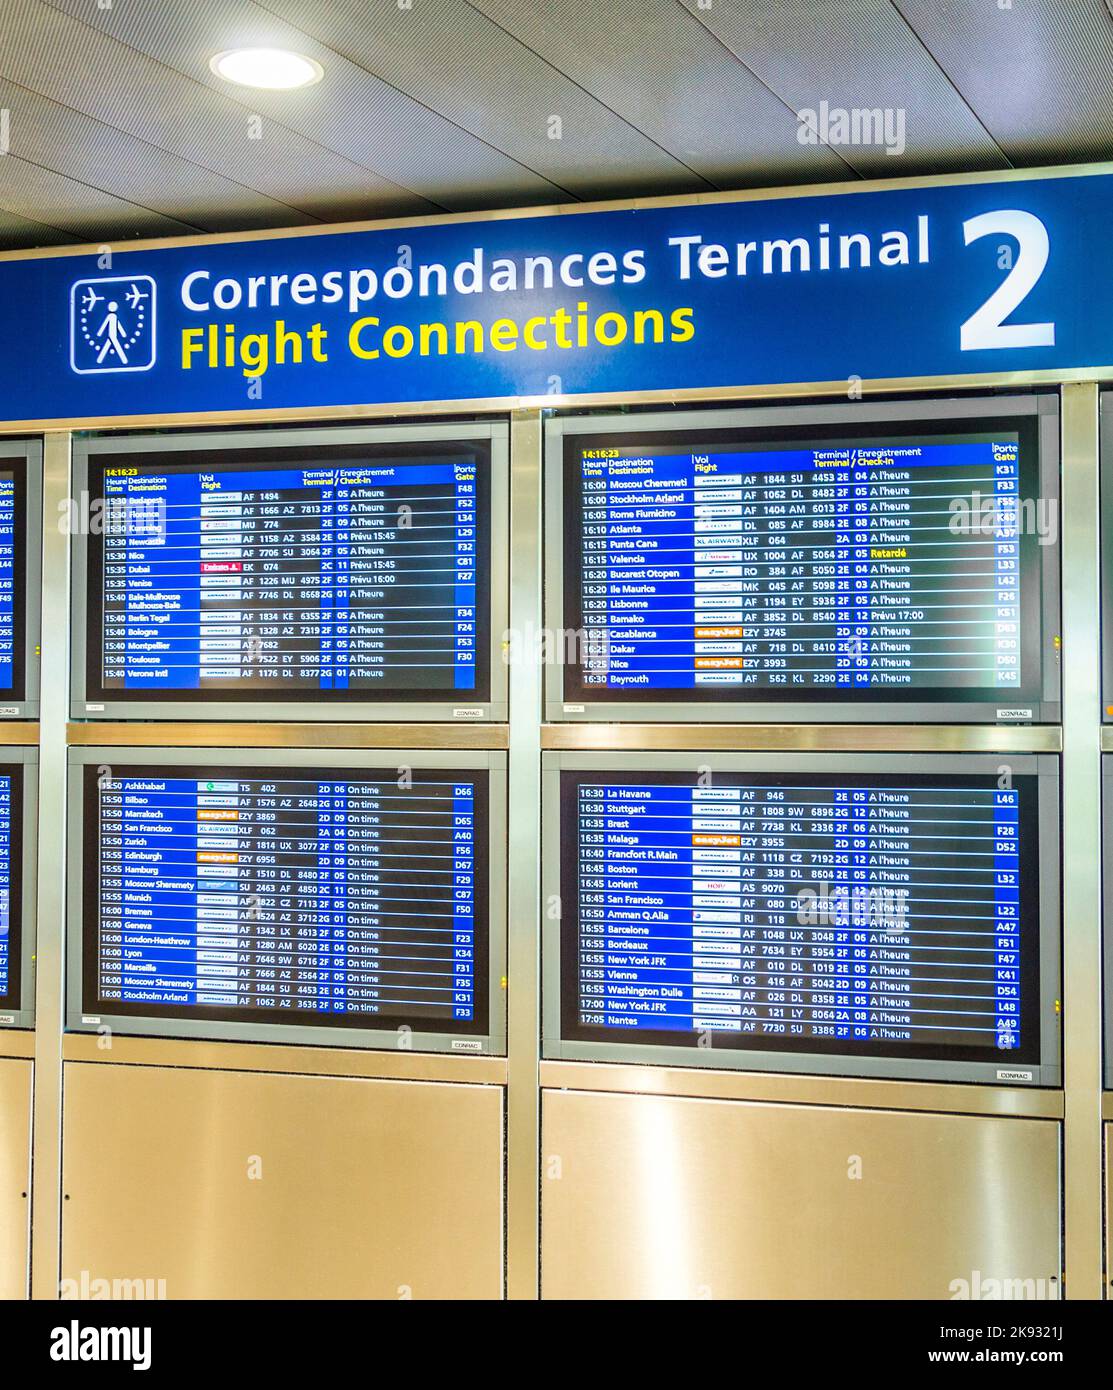 PARIS, FRANCE - JUNE 13, 2015: Charles de Gaulle  airport, hall of departures in Paris, France. A board with the schedule of departures of planes indi Stock Photo